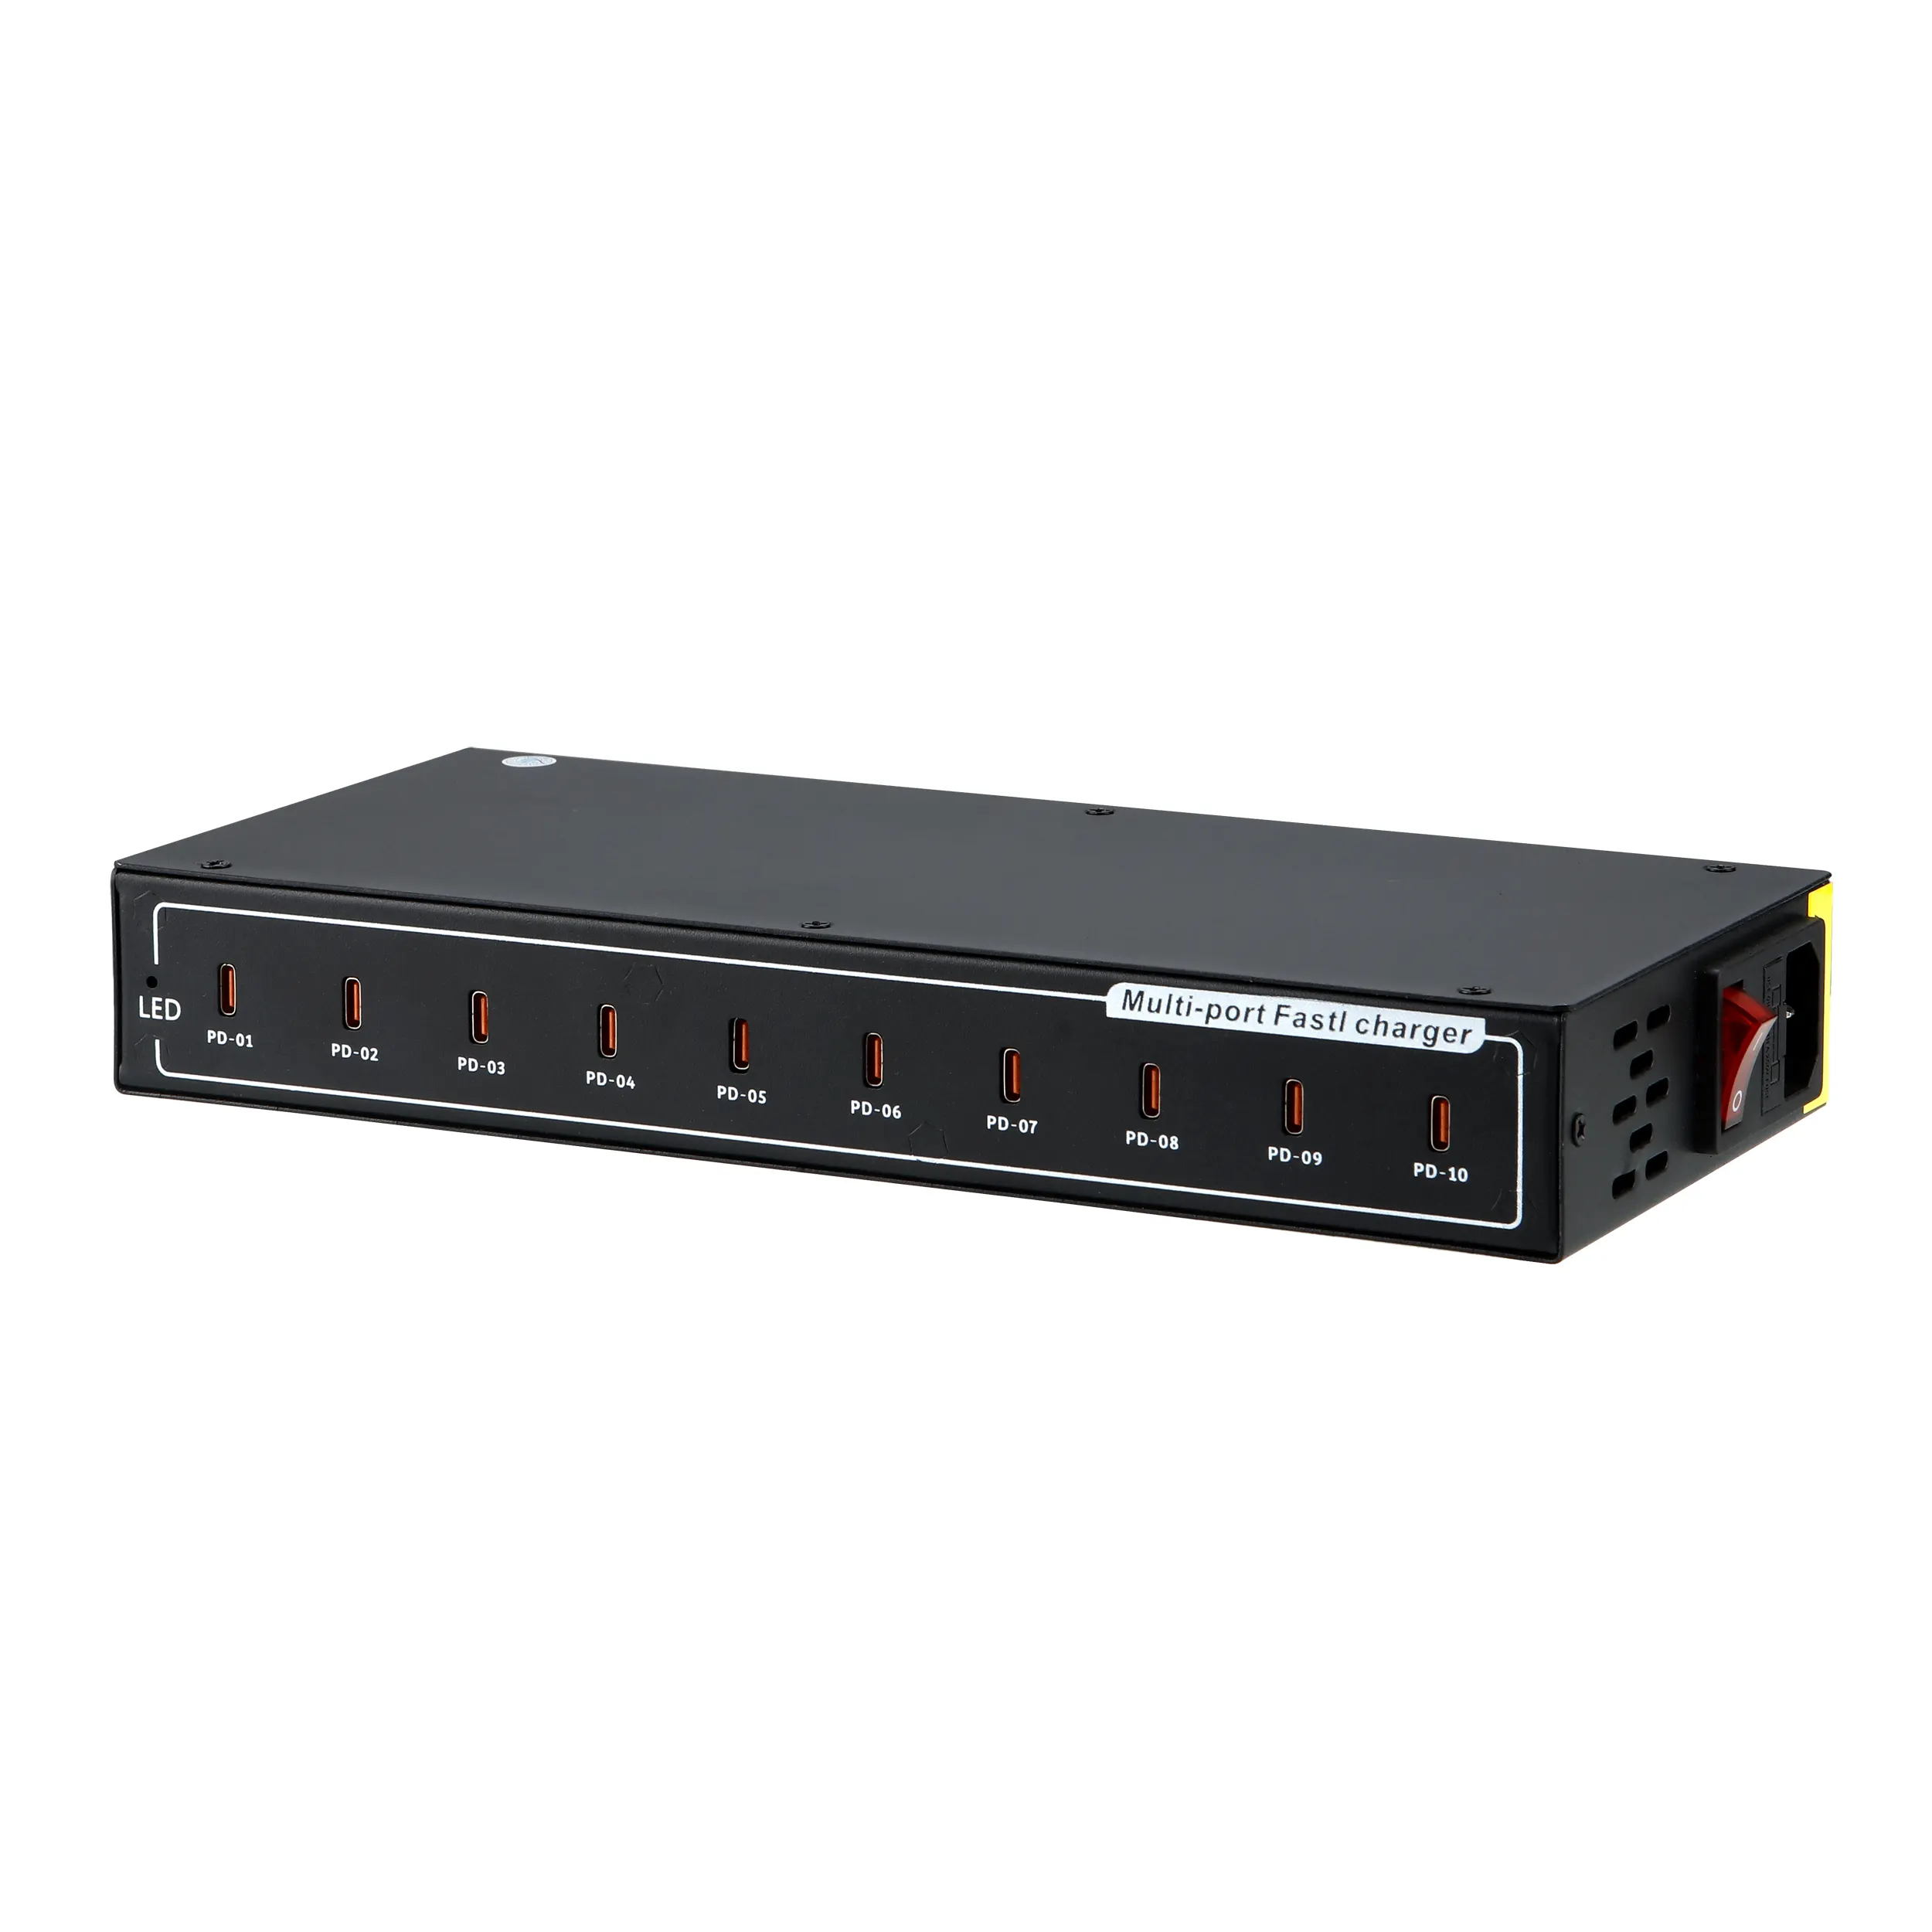 Multi-function multi-port charger quick charging adapter PD 10 port 200W TYPE-C integrated charging station